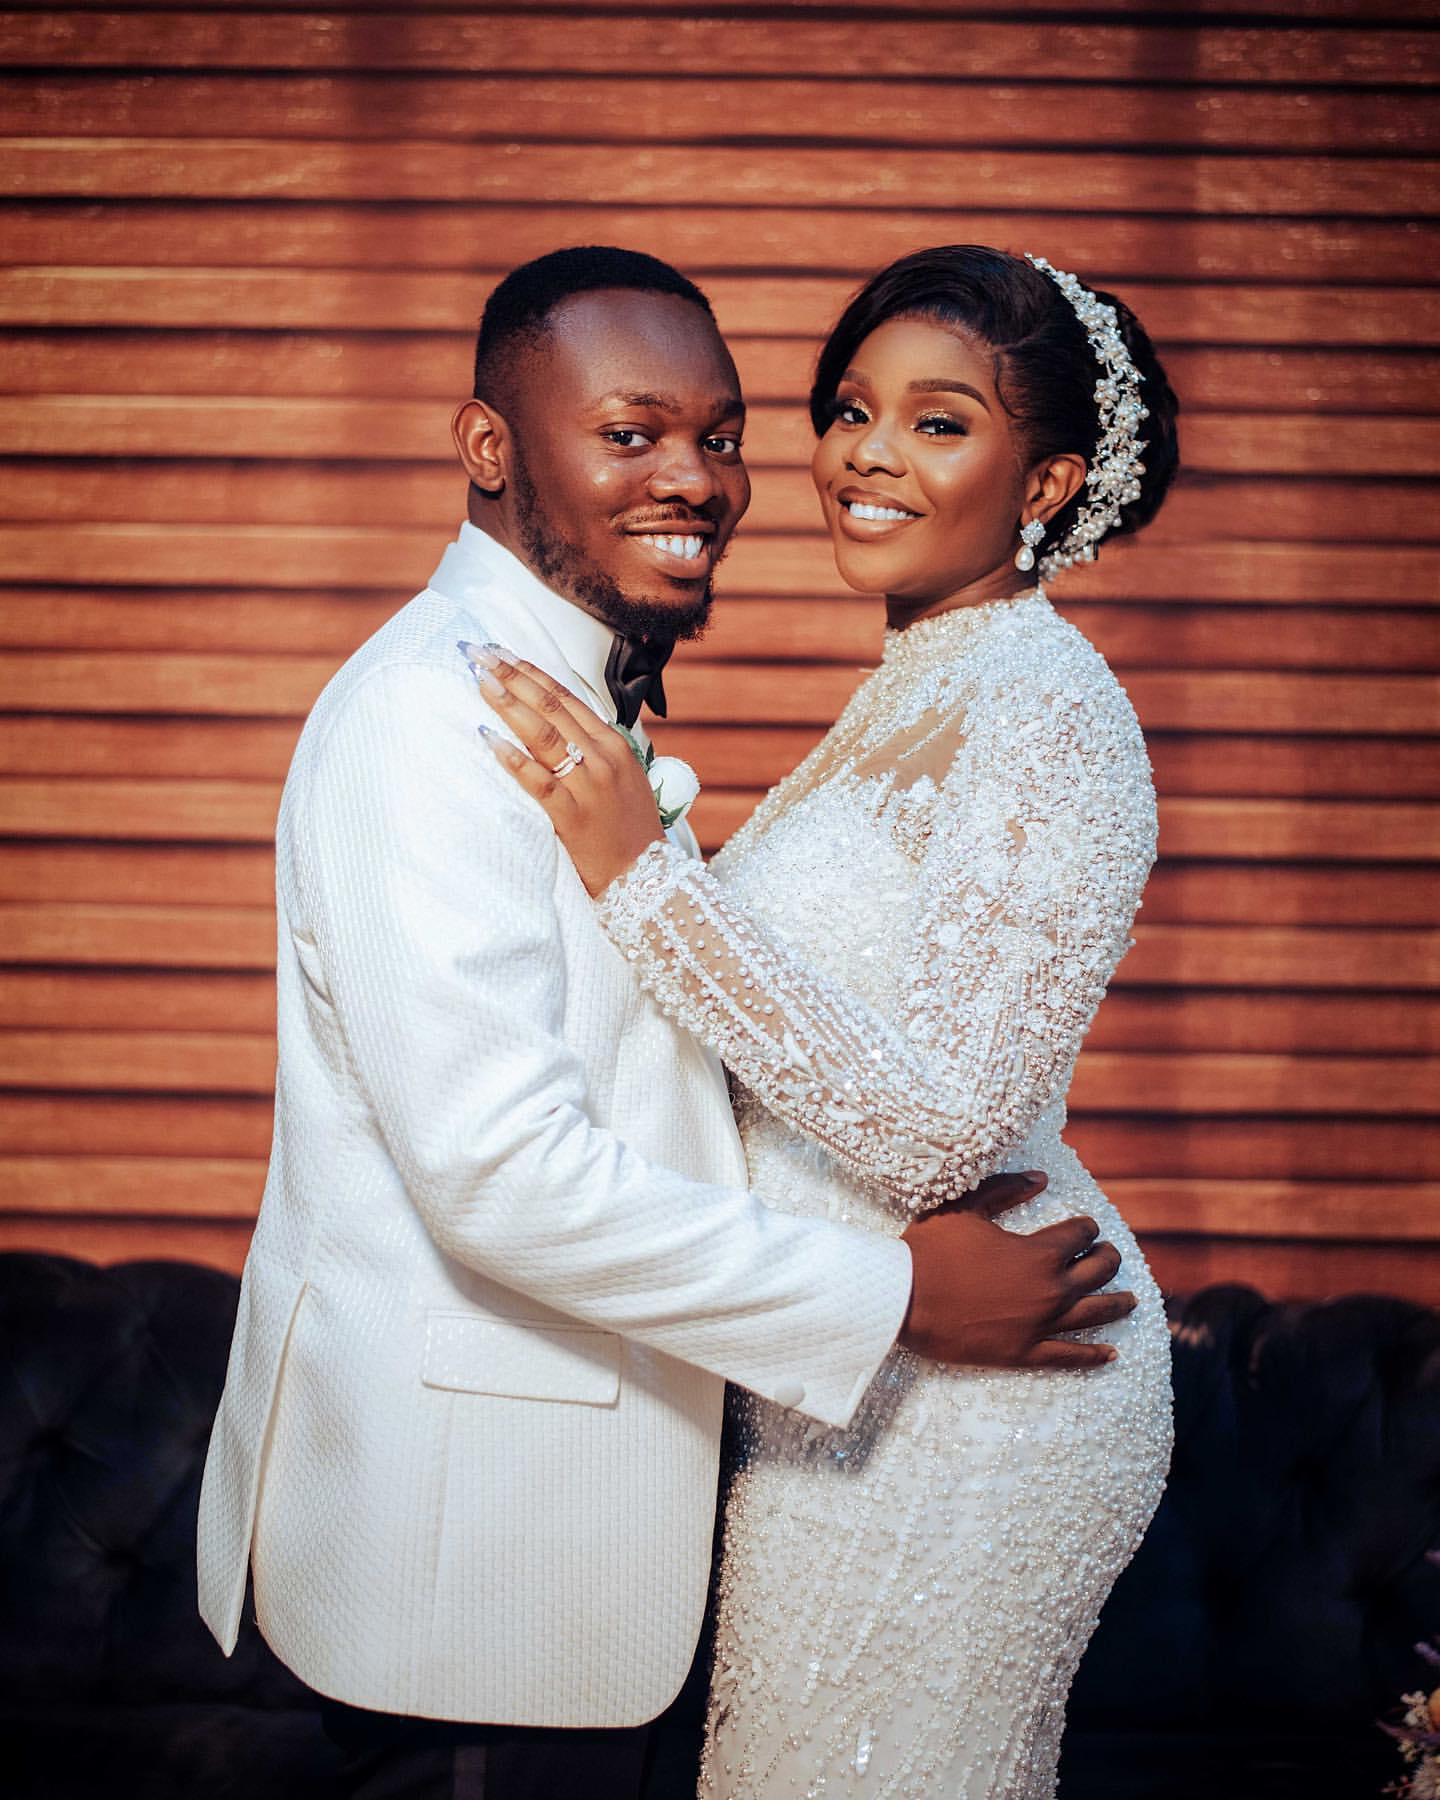 Bole festival wedding: How Nonso met Nenye and the most exciting moments of their union